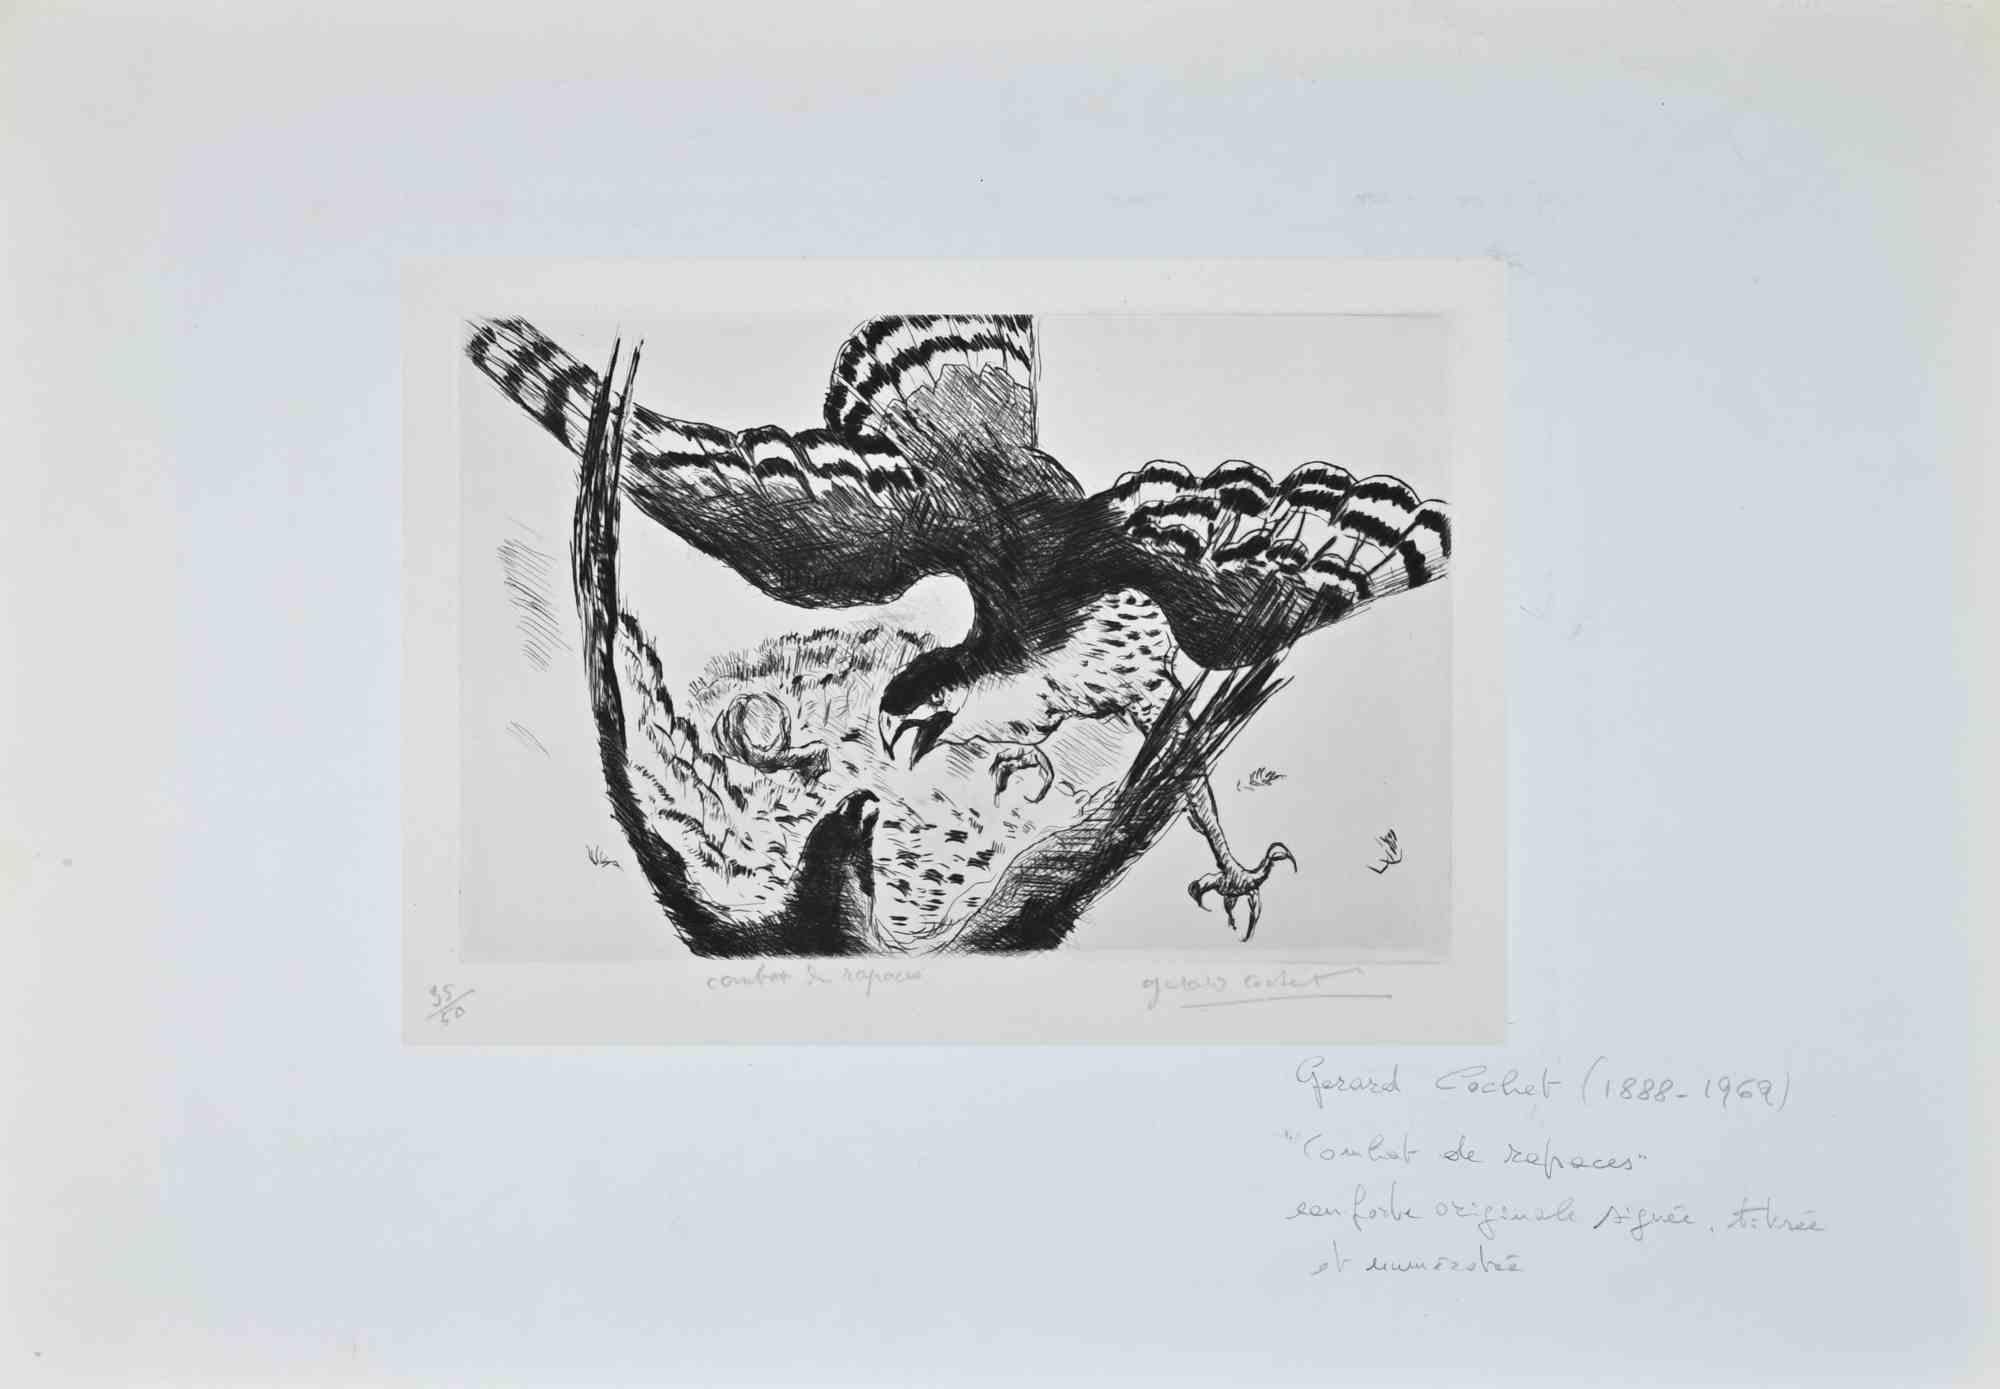 Fight -  Original Etching by Gérard Cochet - Early 20th Century For Sale 1